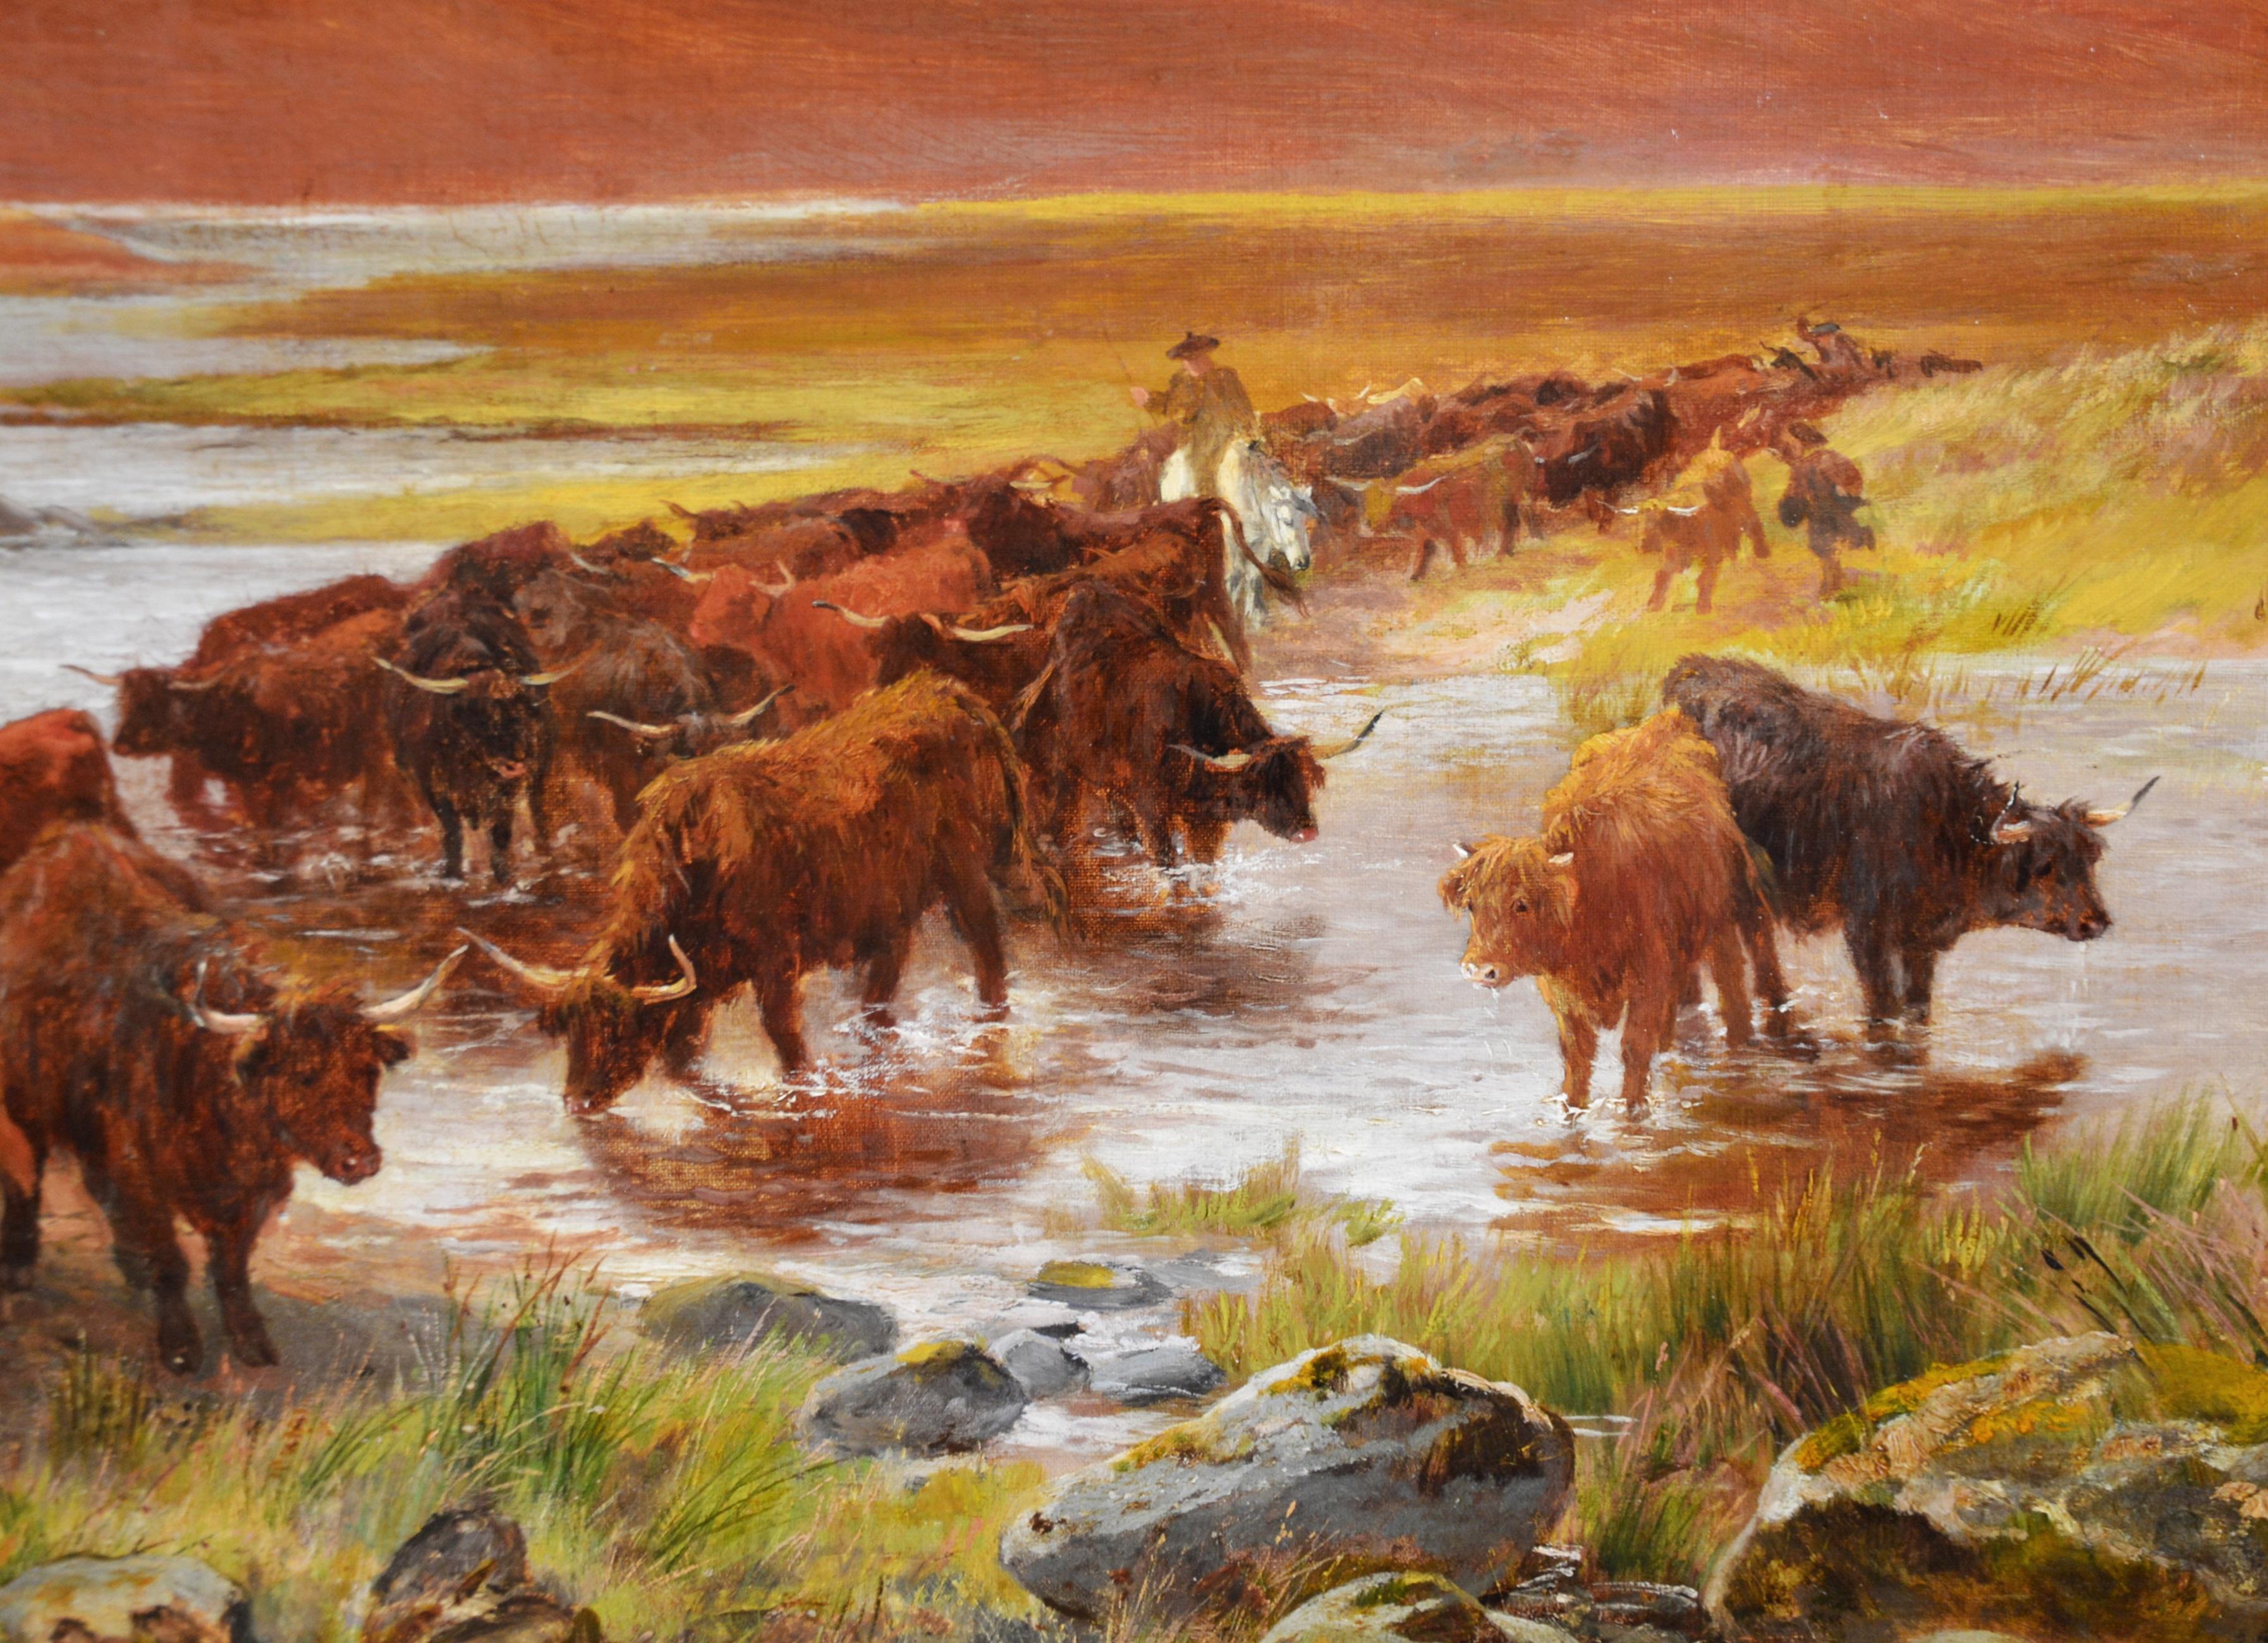 ‘Highlanders Heading South’ by Henry Garland (1834-1913). The painting – which depicts a herd of longhorn cattle coming down from the Scottish Highlands for the winter – is signed by the artist and presented in a fine quality, newly commissioned